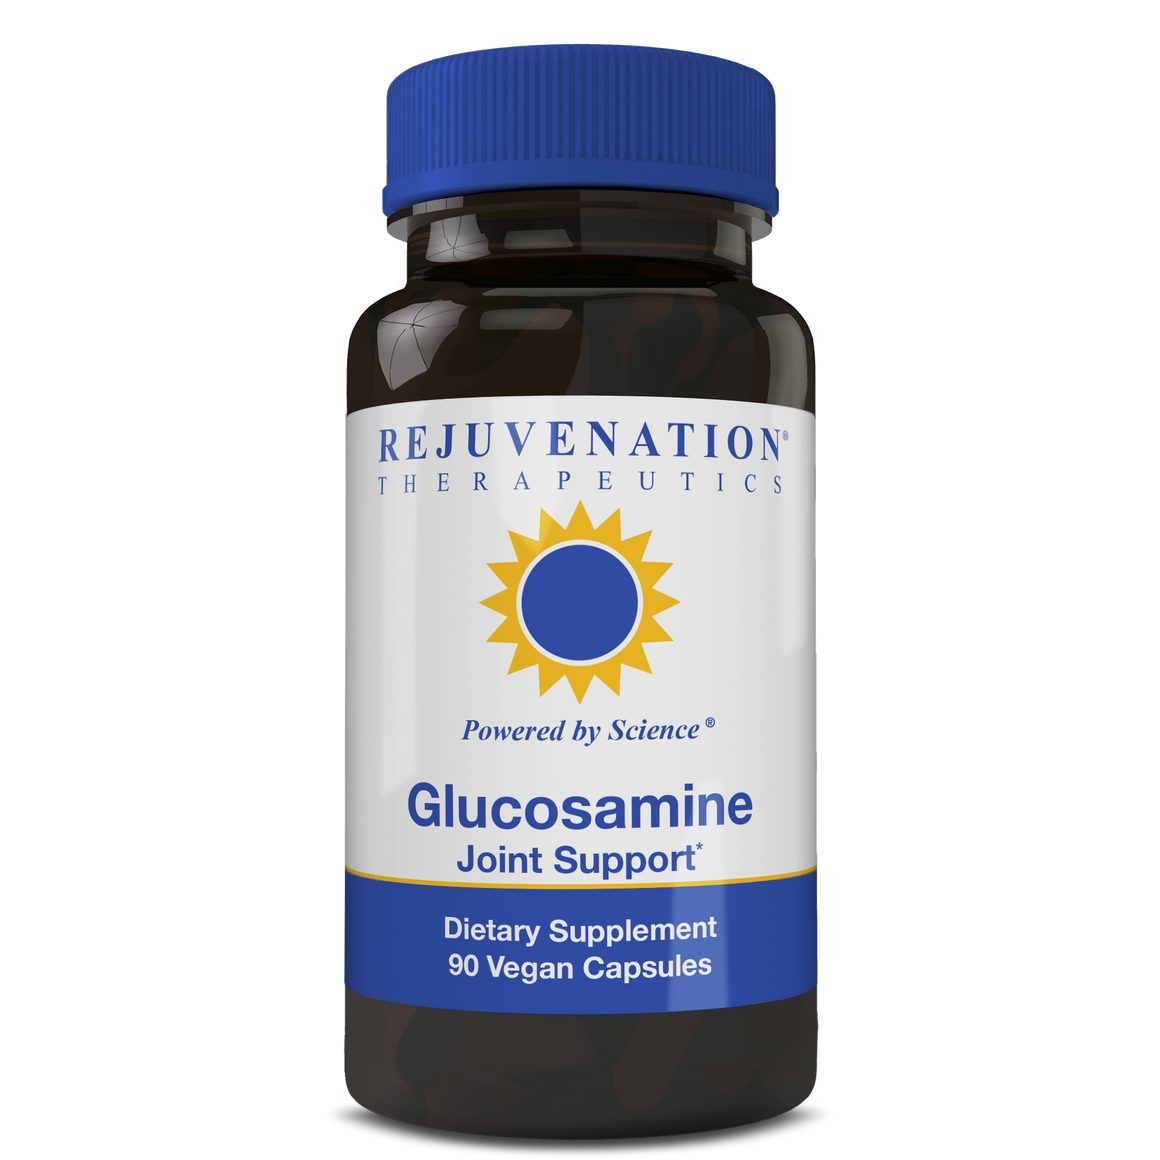 Glucosamine (1500 mg, 90 Vegan Capsules) - Healthy Joints & Cartilage, Non-GMO, Gluten-Free